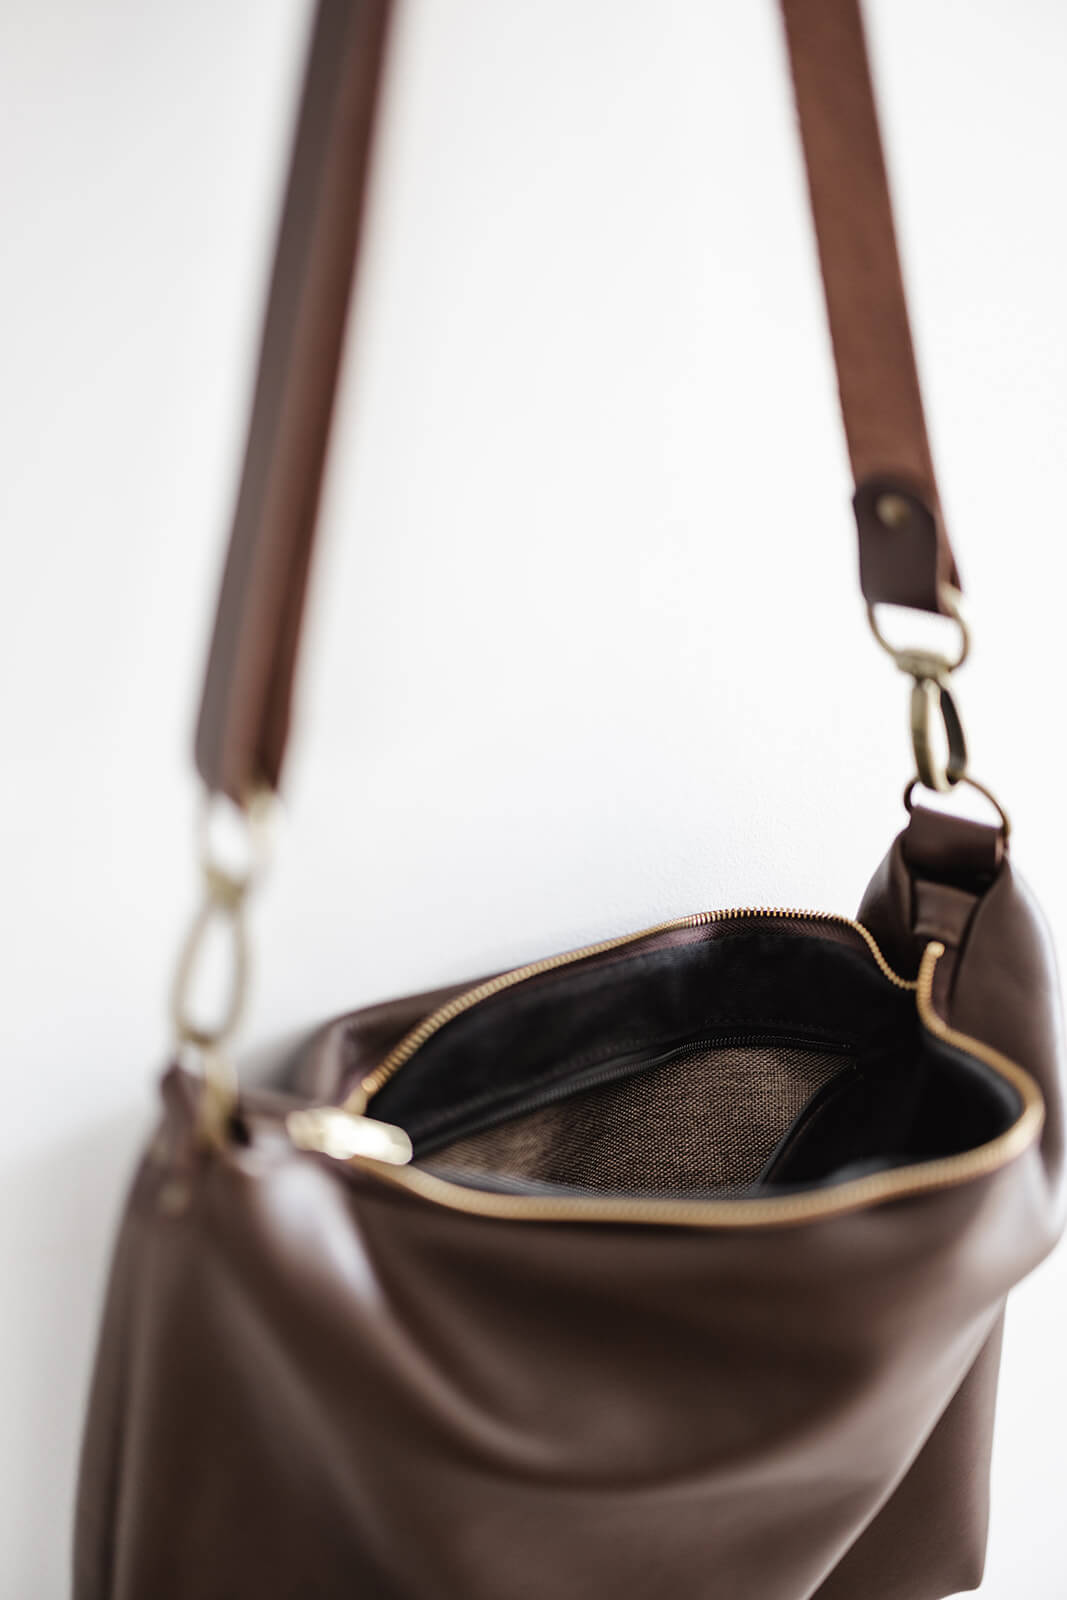 Product pic of the Ella Jackson Leather Carryall in Chocolate Brown. Pic is showing brown leather bag and strap, antique hardware, gold zip, black lining and brown internal pocket fabric